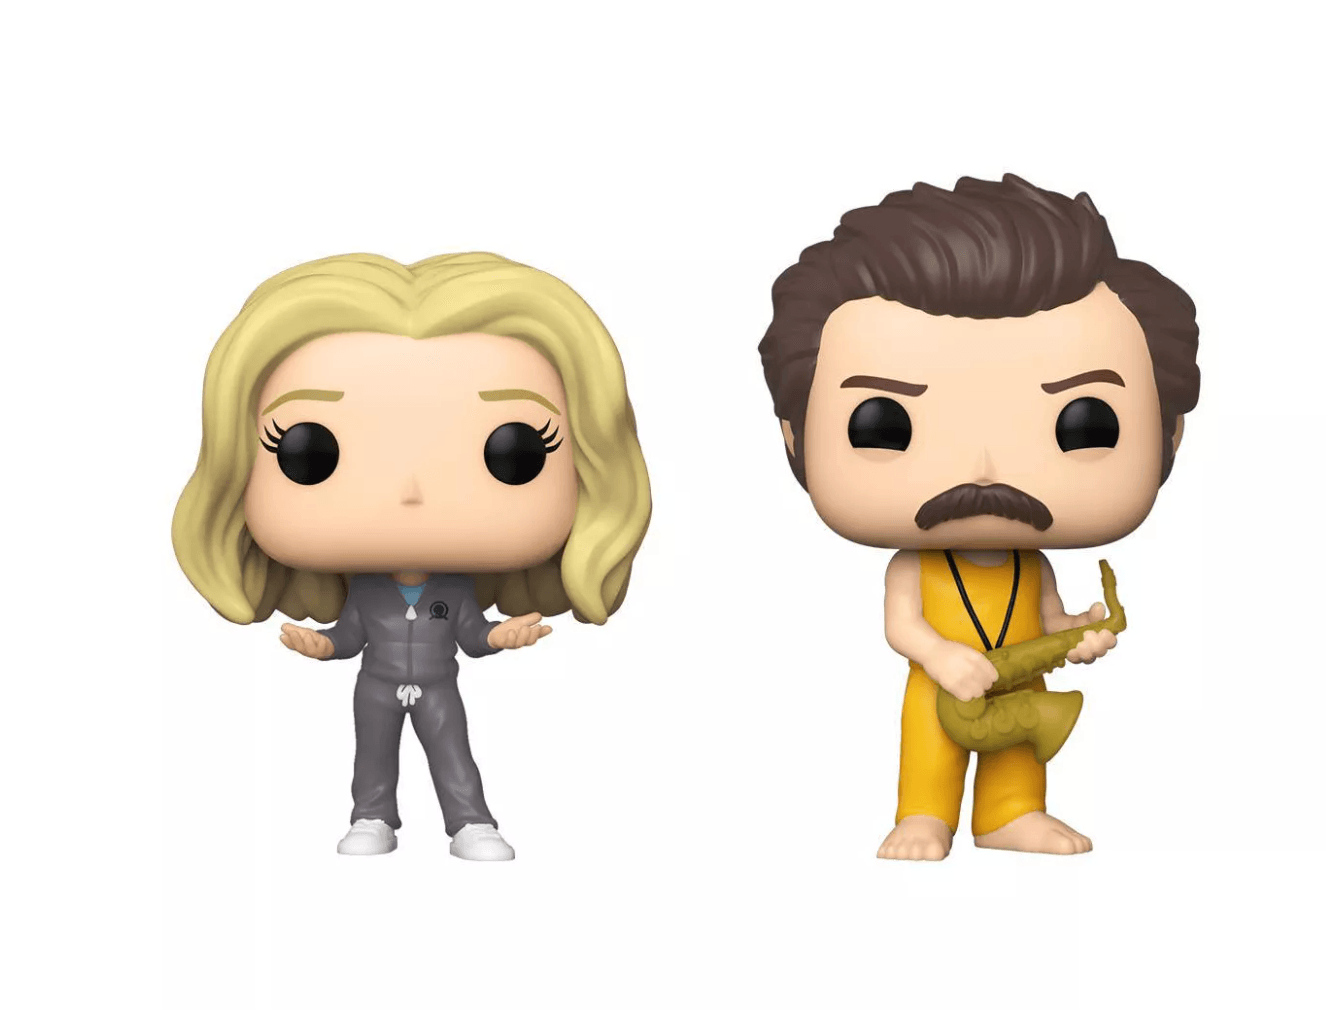 FUN56740 Parks and Recreation - Locked In Ron & Leslie Pop! Vinyl 2-Pack [RS] - Funko - Titan Pop Culture